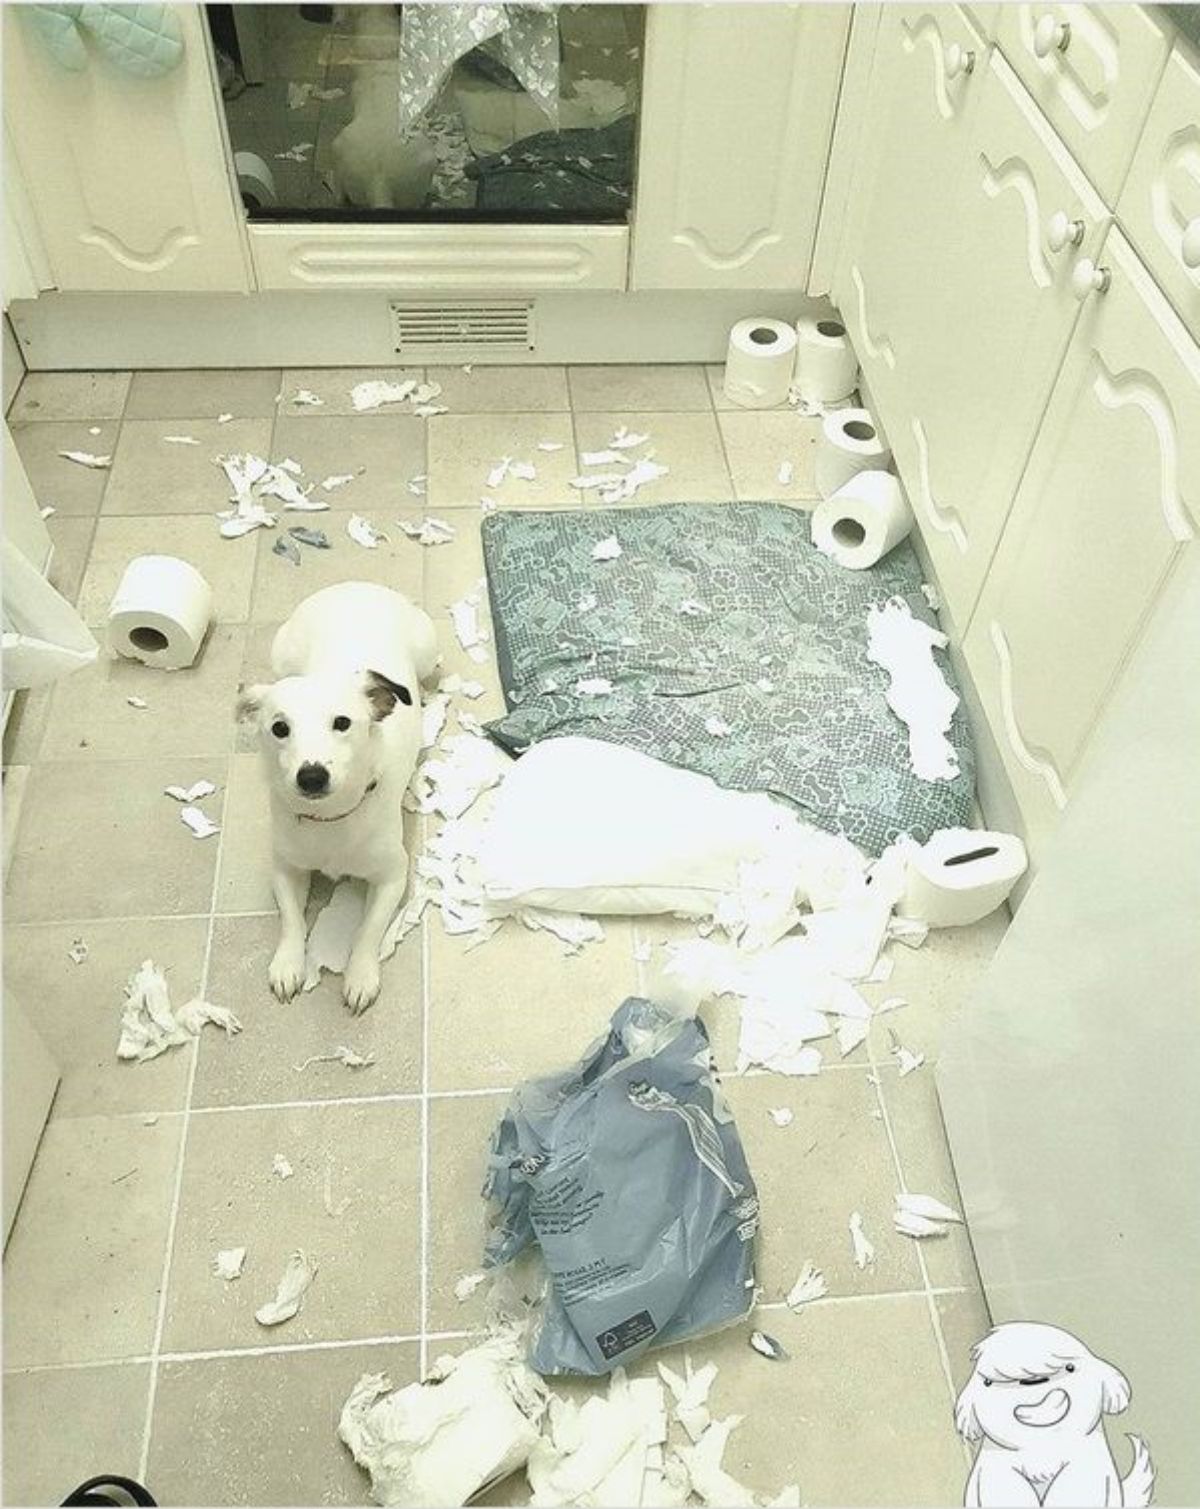 white dog laying on bathroom floor with toilet paper on the floor with some ripped up